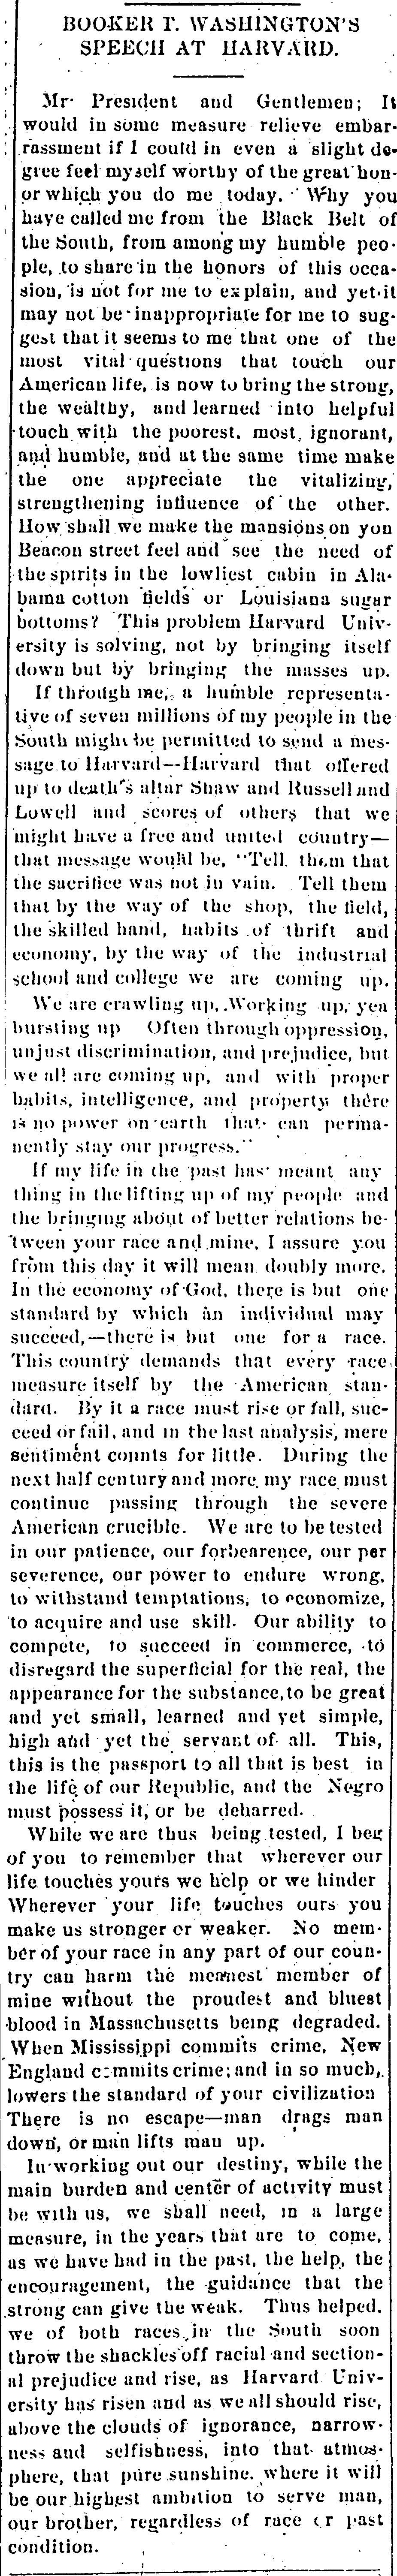 Enterprise__July_11_1896. From Early American Newspapers.